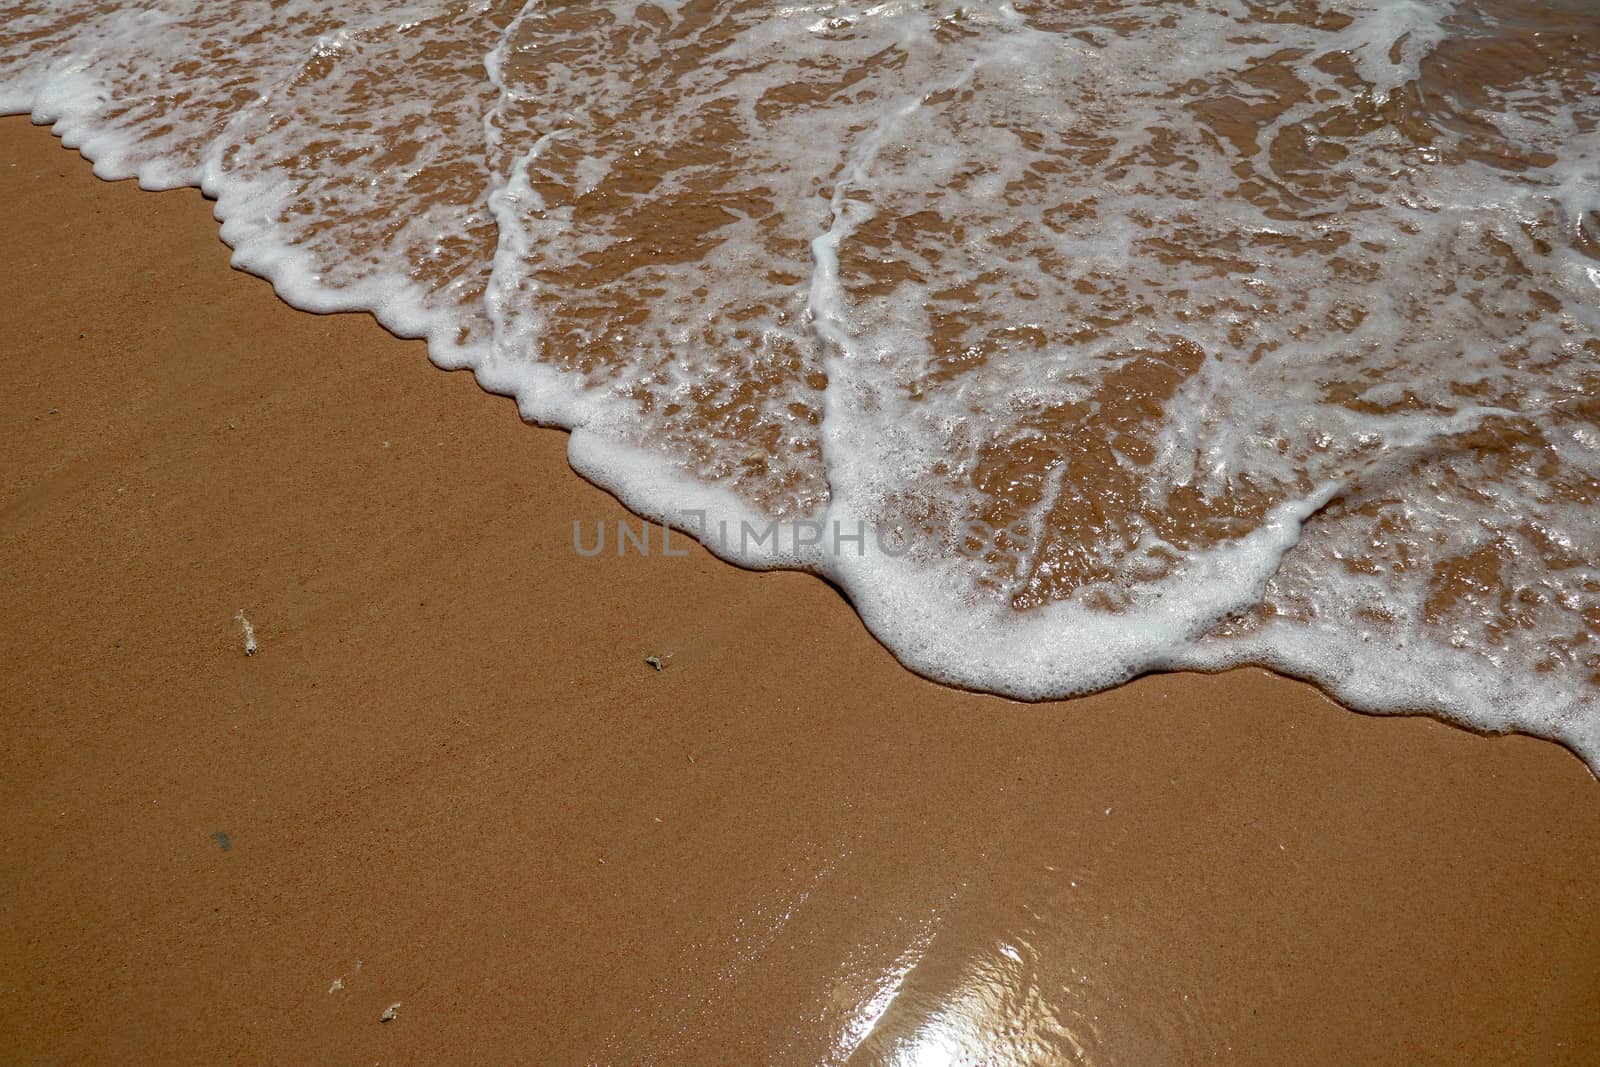 Soft wave of the sea on the sandy beach. Small wave of water on clear sandy beach.